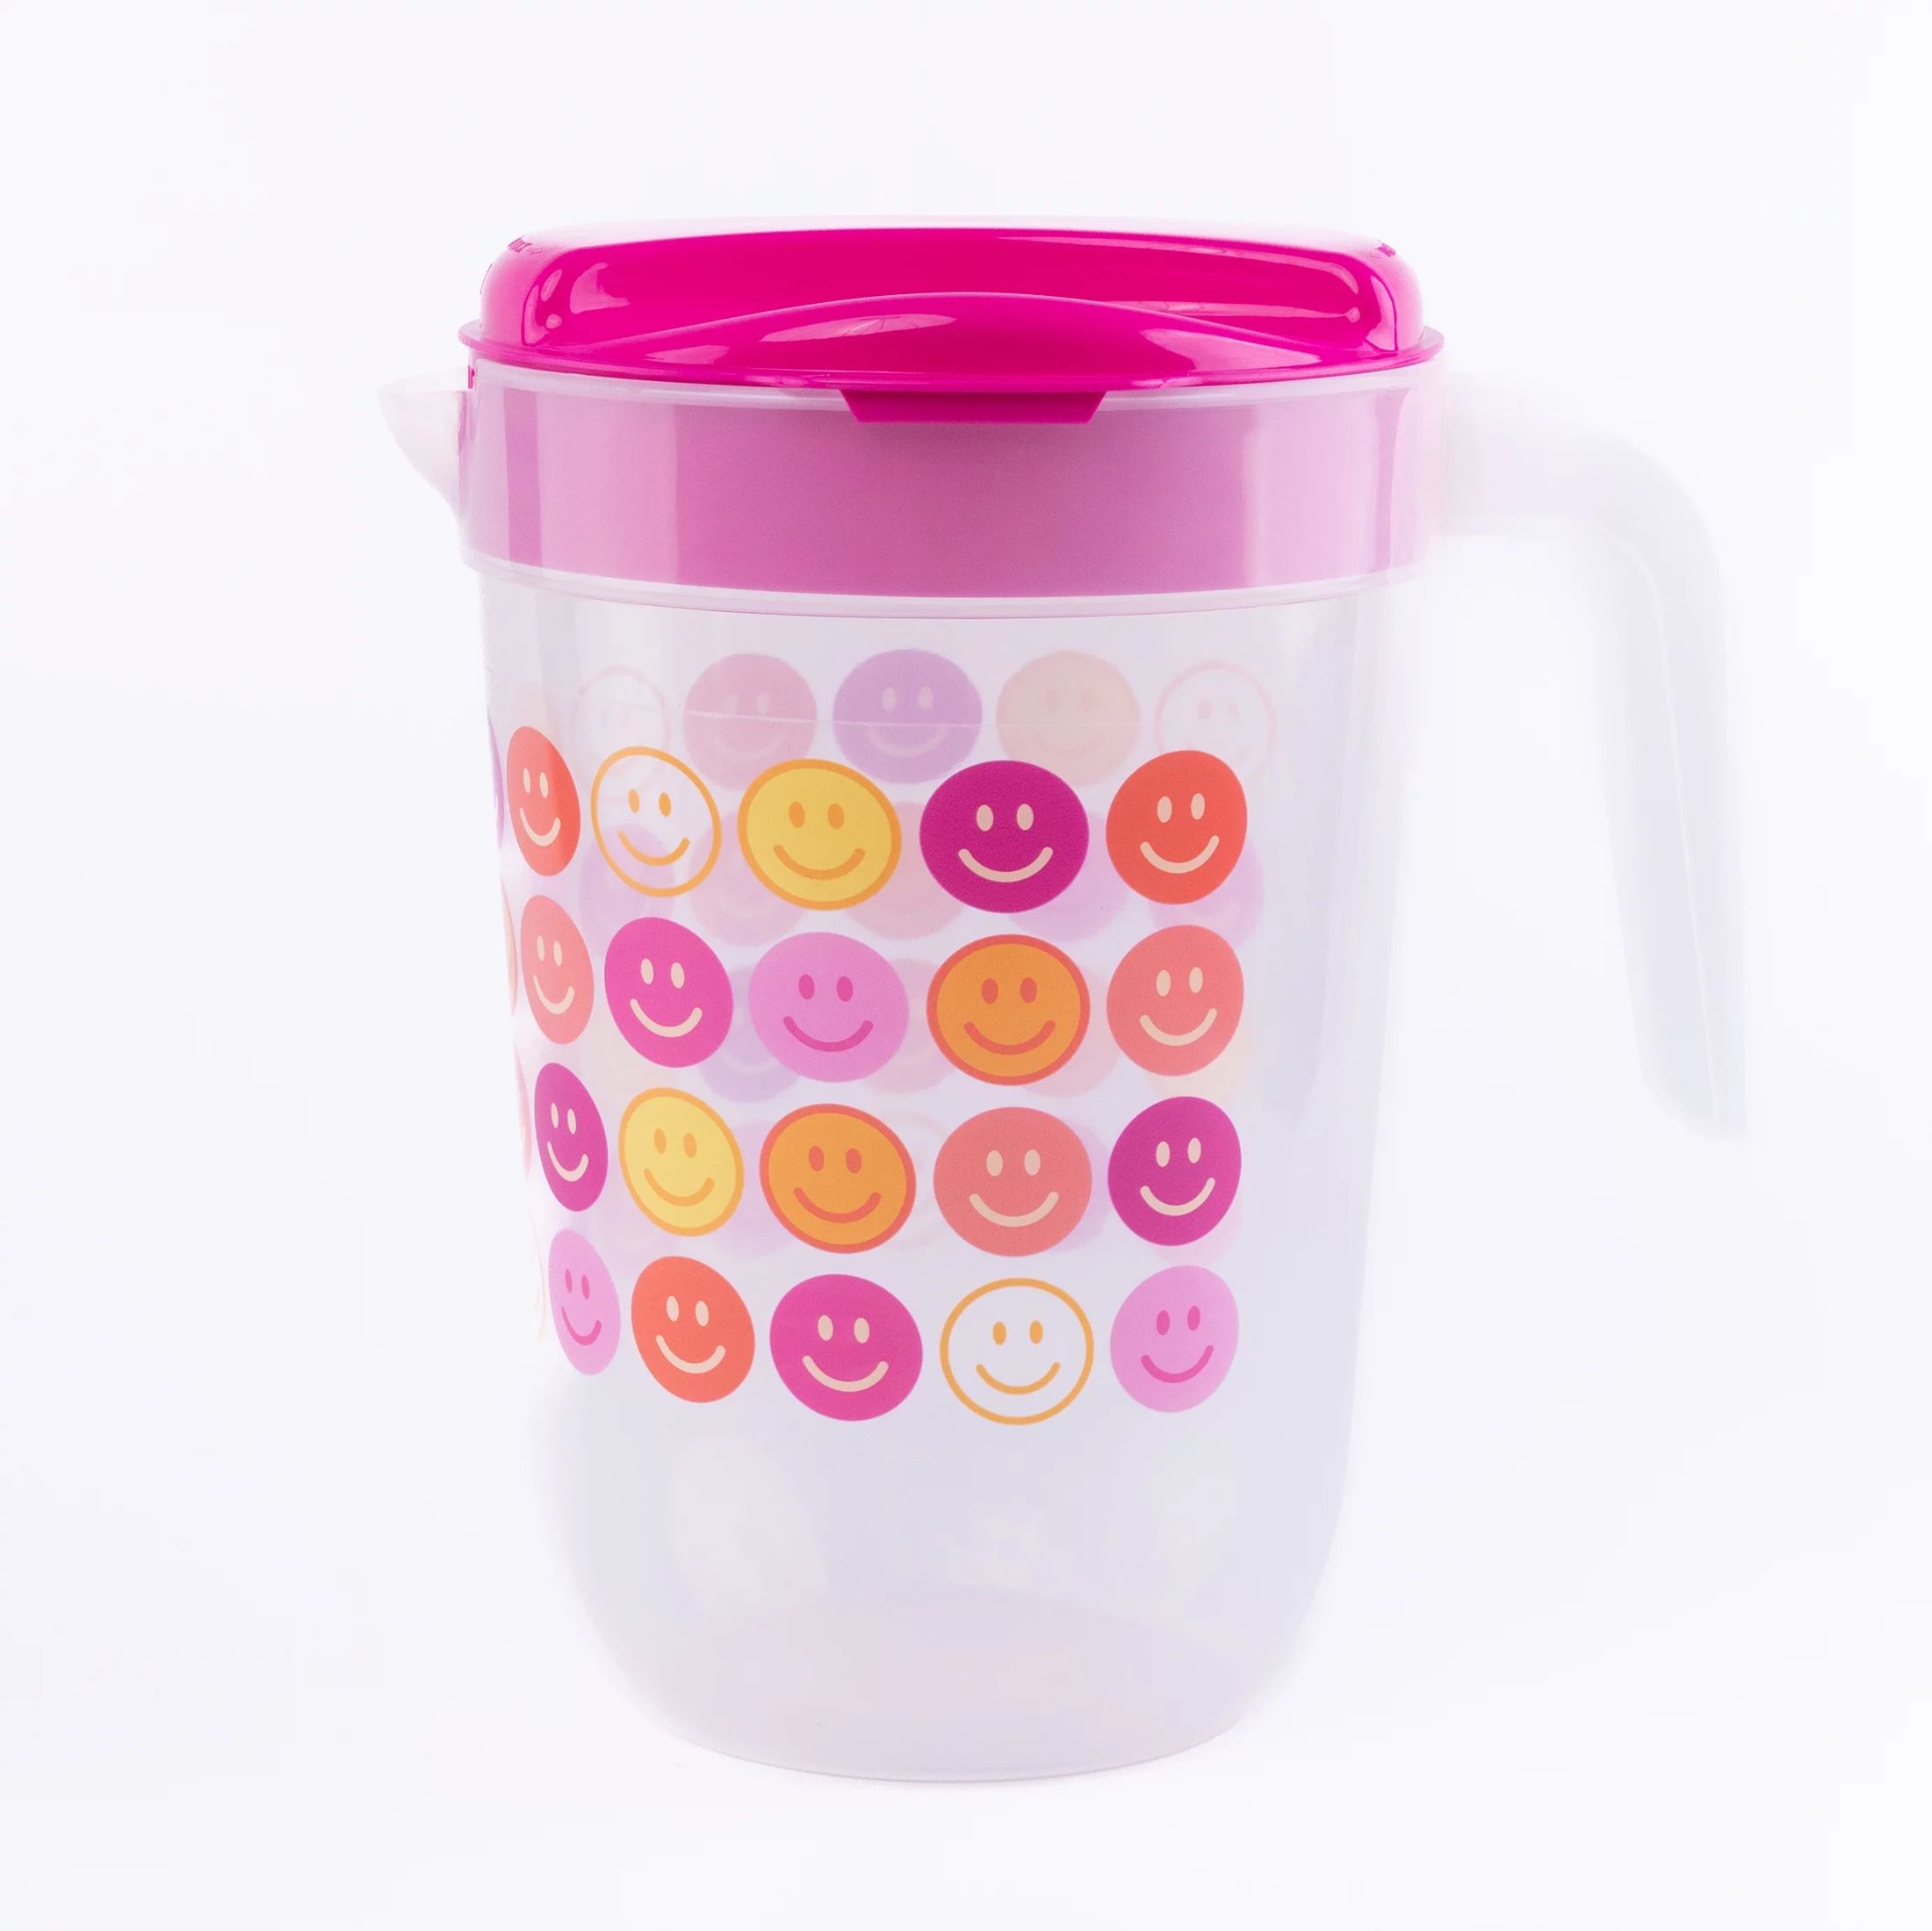 Mainstays Plastic 1 Gallon Pitcher with Pink Color Lid – Smiley | Walmart (US)